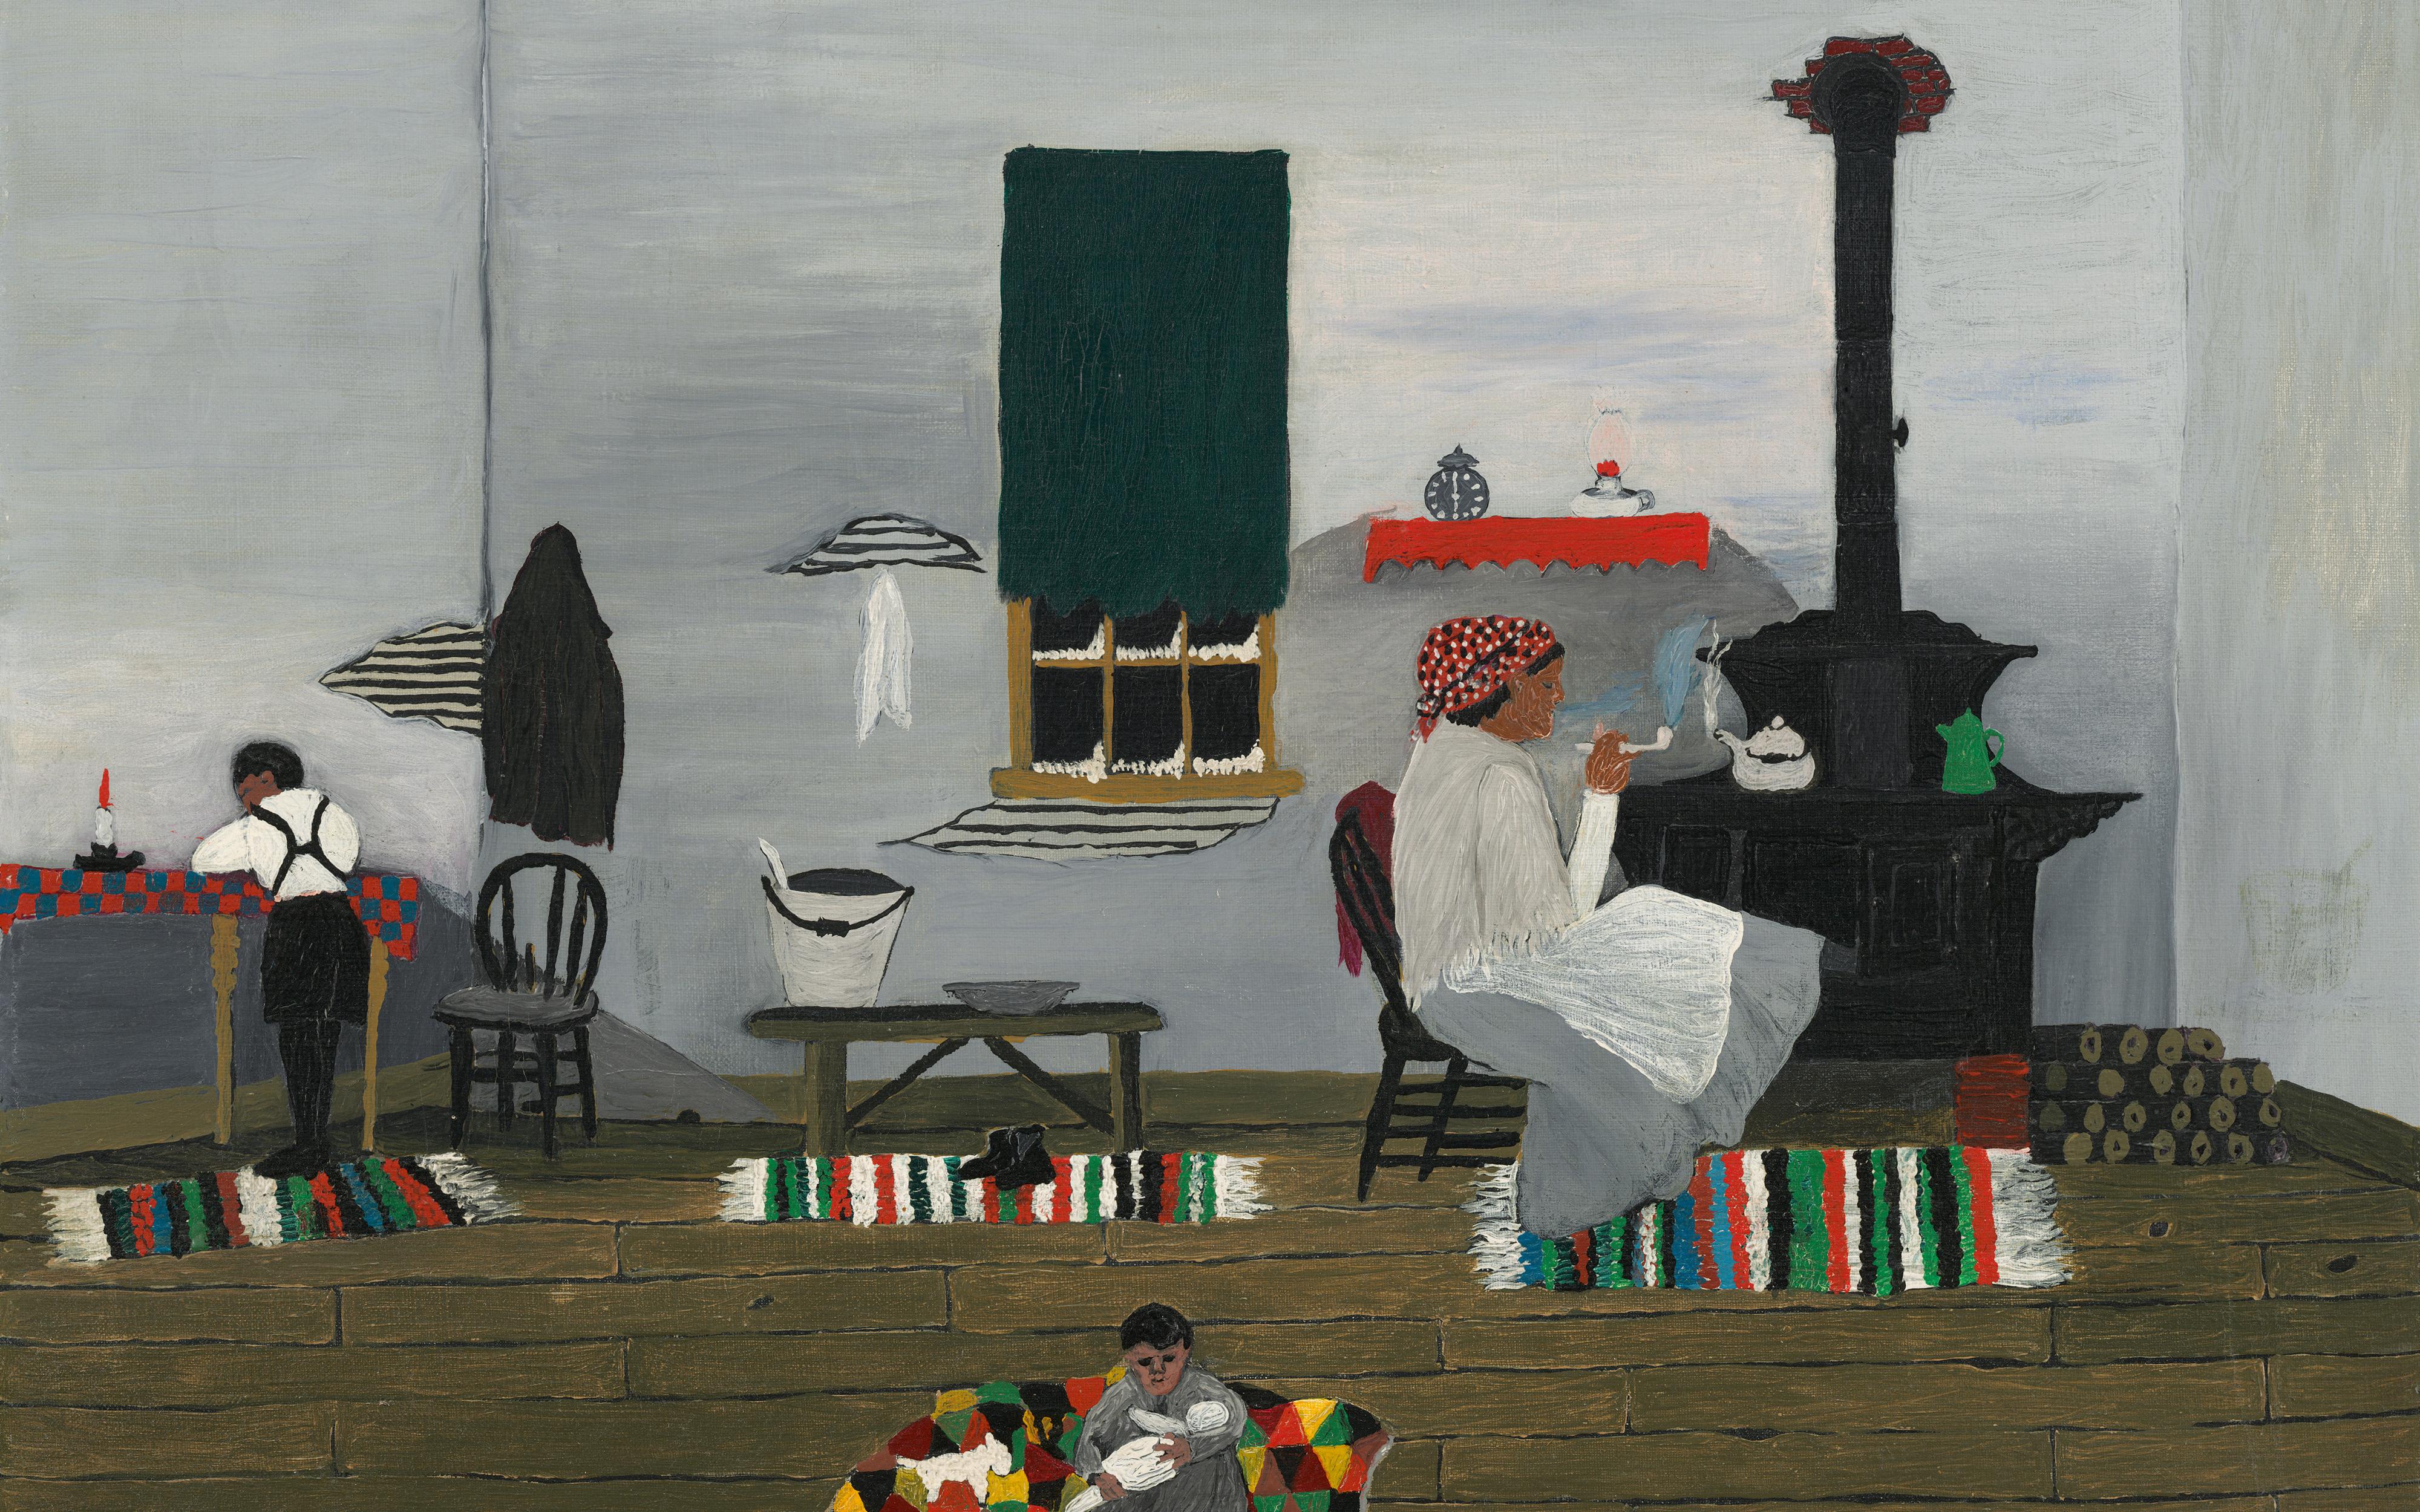 Horace Pippin, Interior, 1944, from the National Gallery of Art, Washington, D.C., gift of Mr. and Mrs. Meyer P. Potamkin, currently featured in 'Outliers and American Vanguard Art,' currently on view at the Los Angeles County Museum of Art through March 17, 2019.